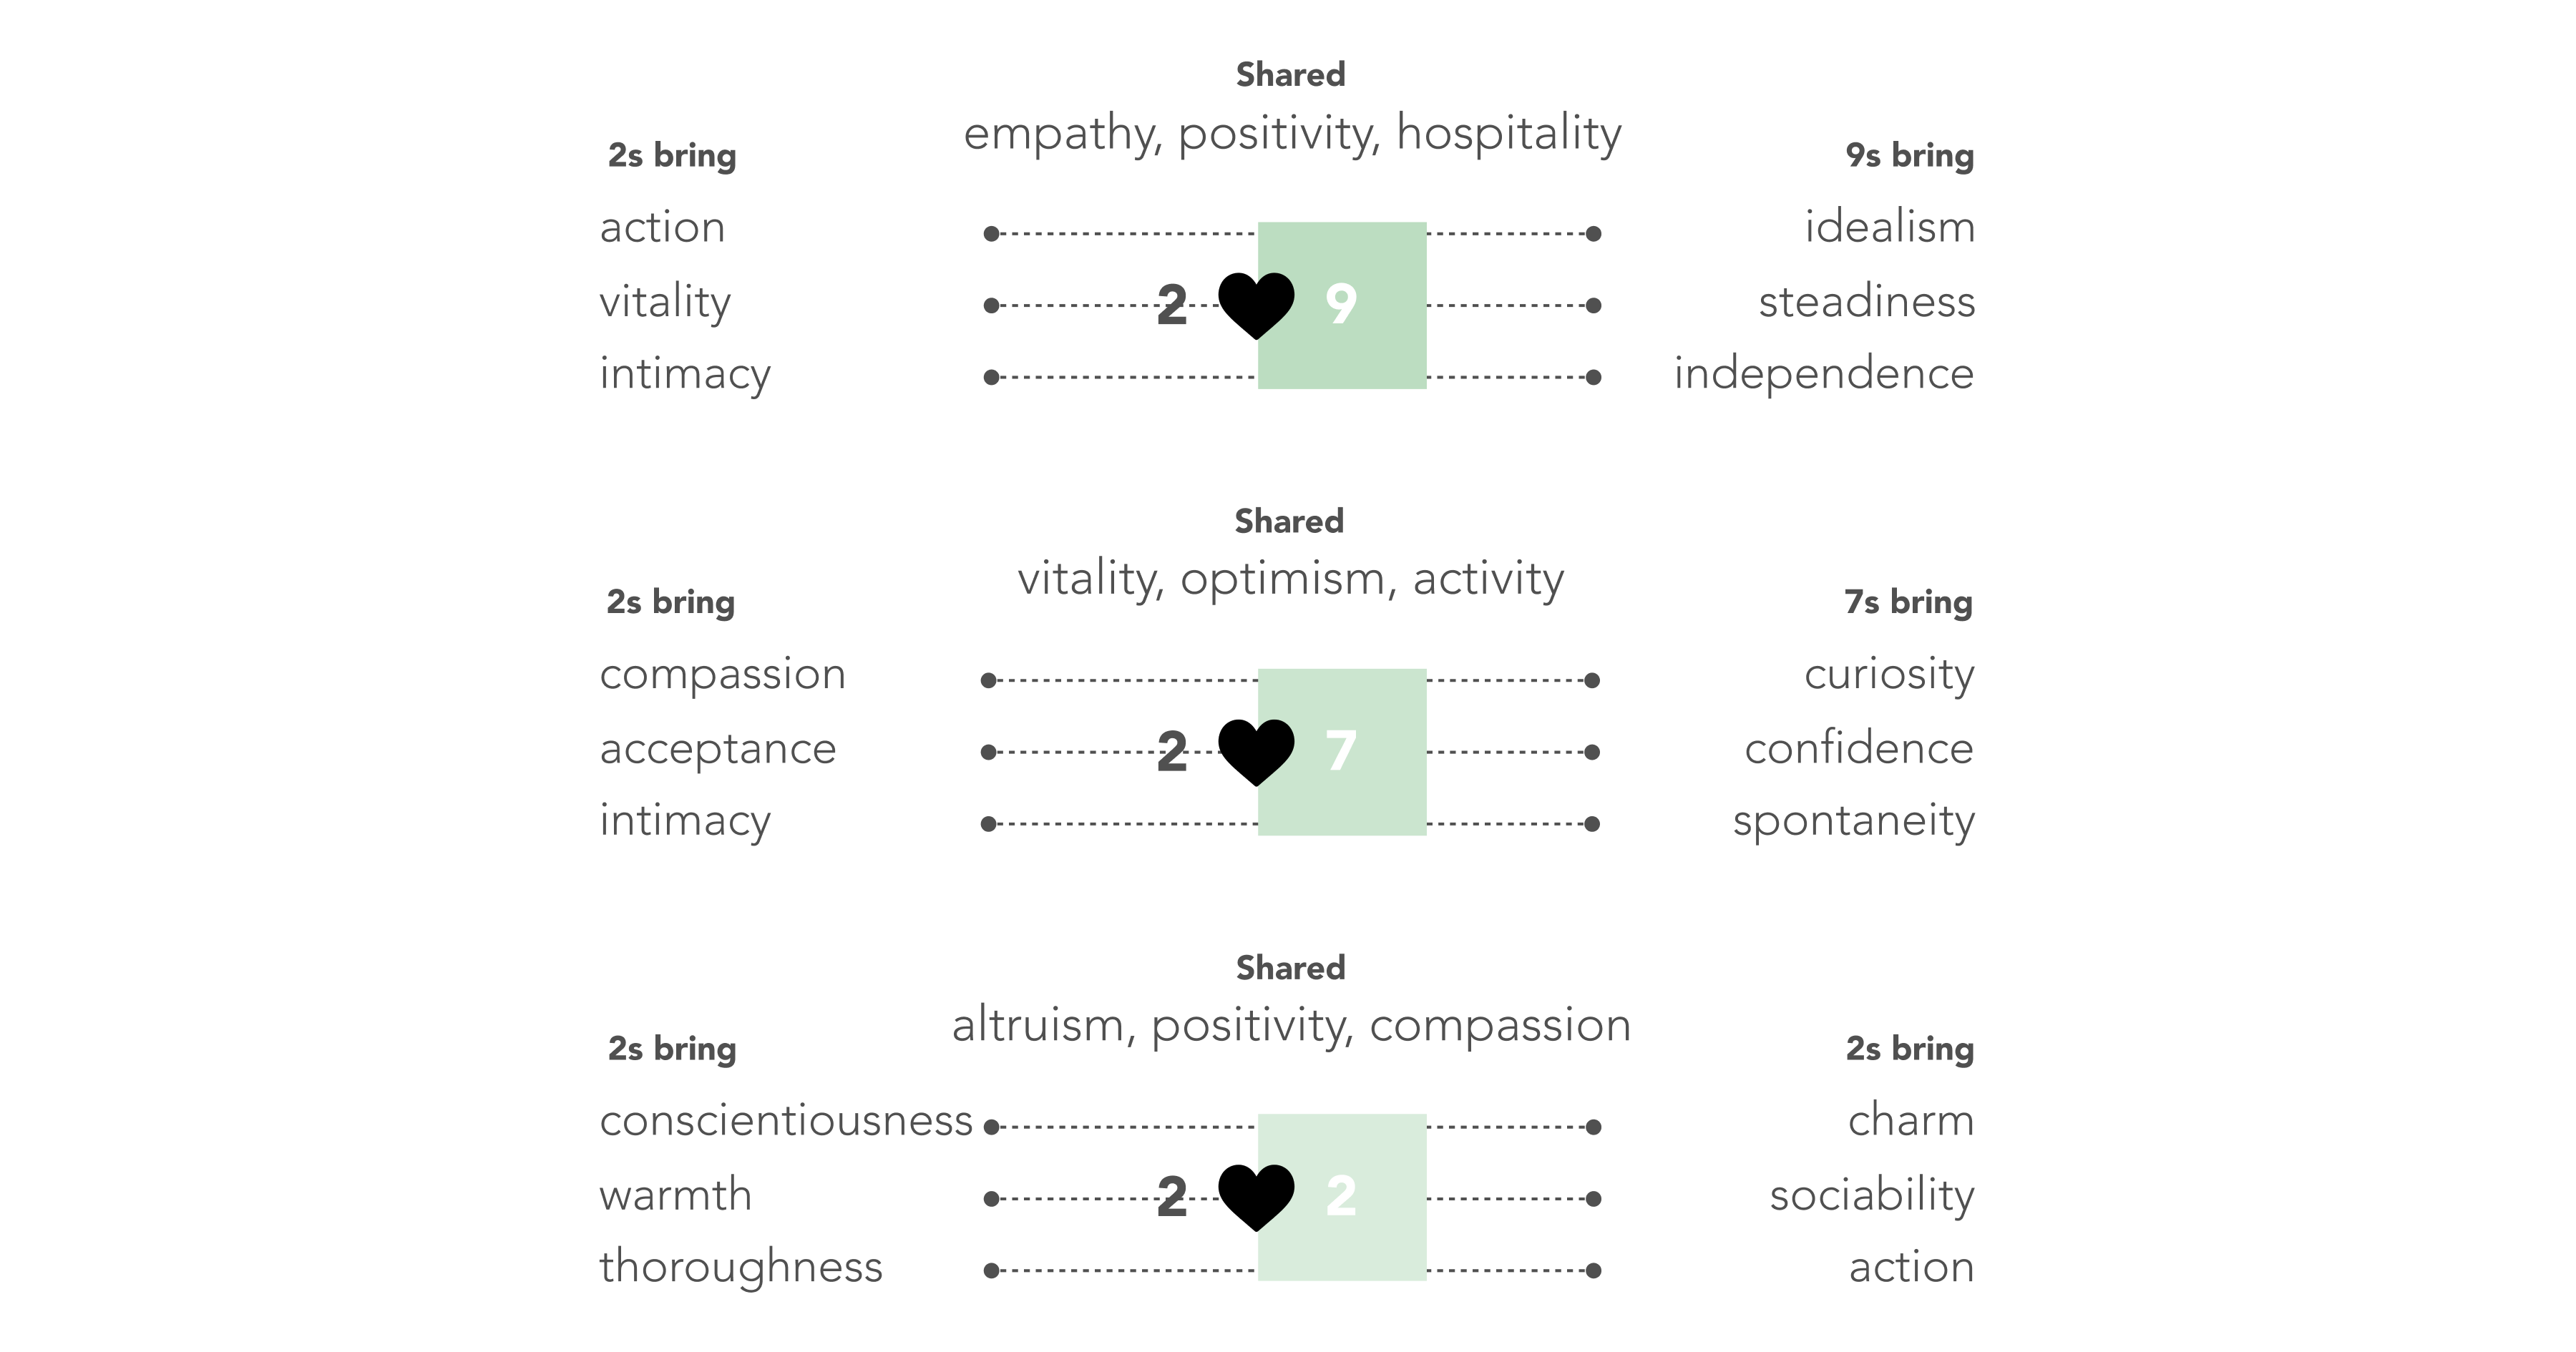 2s and 9s share empathy, positivity, hospitality. 2s bring action, vitality, intimacy, while 9s bring idealism, steadiness, independence. 2s and 7s share vitality, optimism, activity. 2s bring compassion, acceptance, intimacy, while 7s bring curiosity, confidence, spontaneity. 2s and 2s share altruism, positivity, compassion. 2s bring conscientiousness, warmth, thoroughness, while other 2s bring charm, sociability, action.